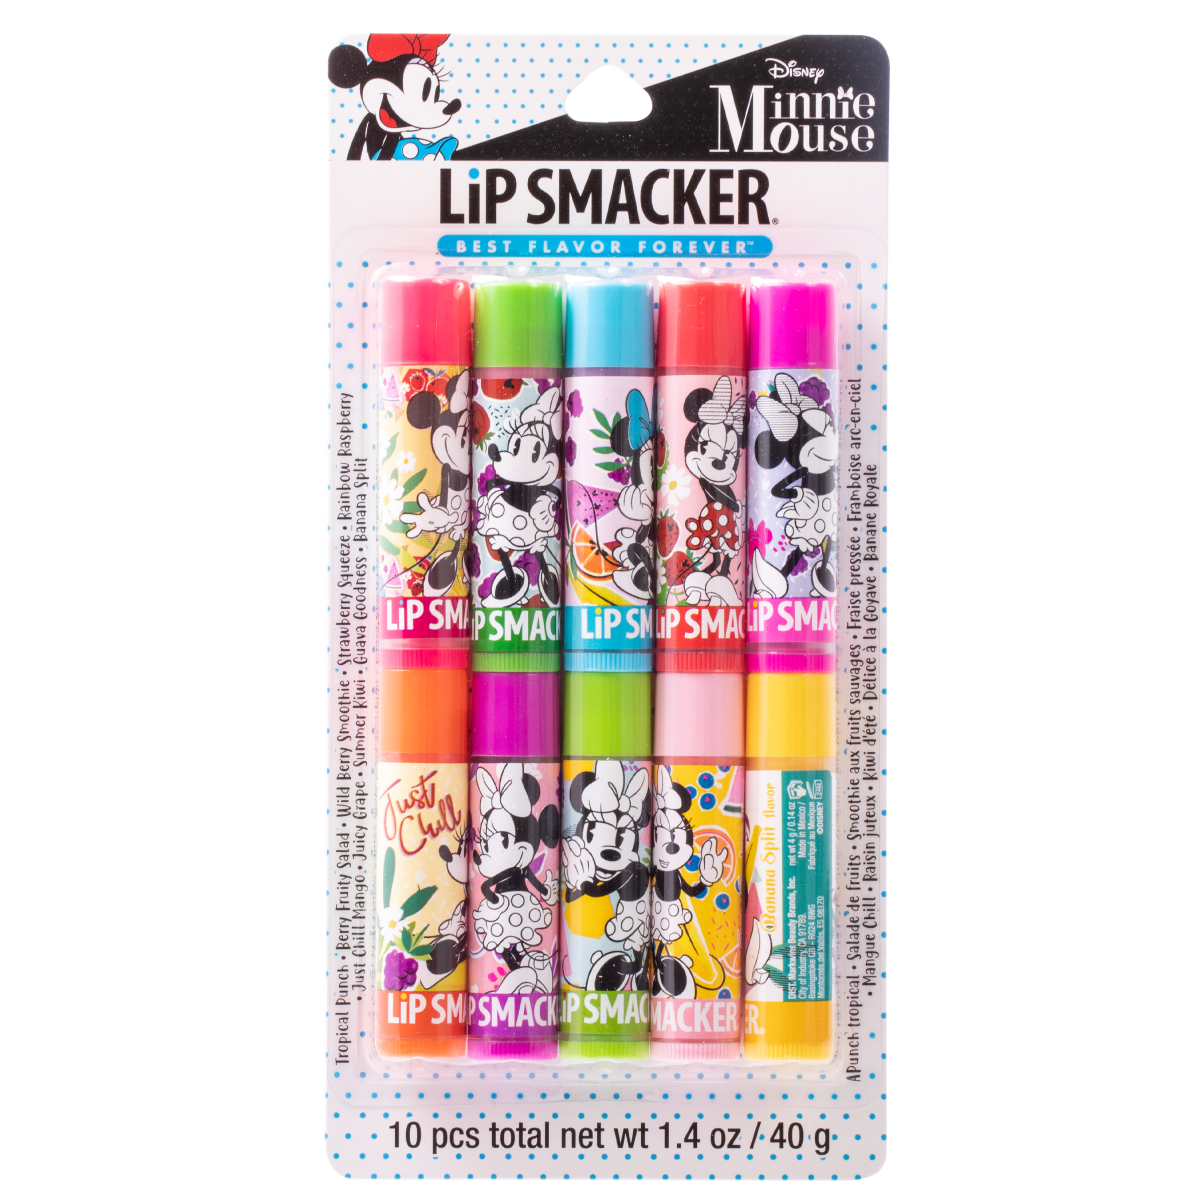 Star Wars Lip Smacker Lip Balm Party Pack Variety 8 Pack – All  Sports-N-Jerseys